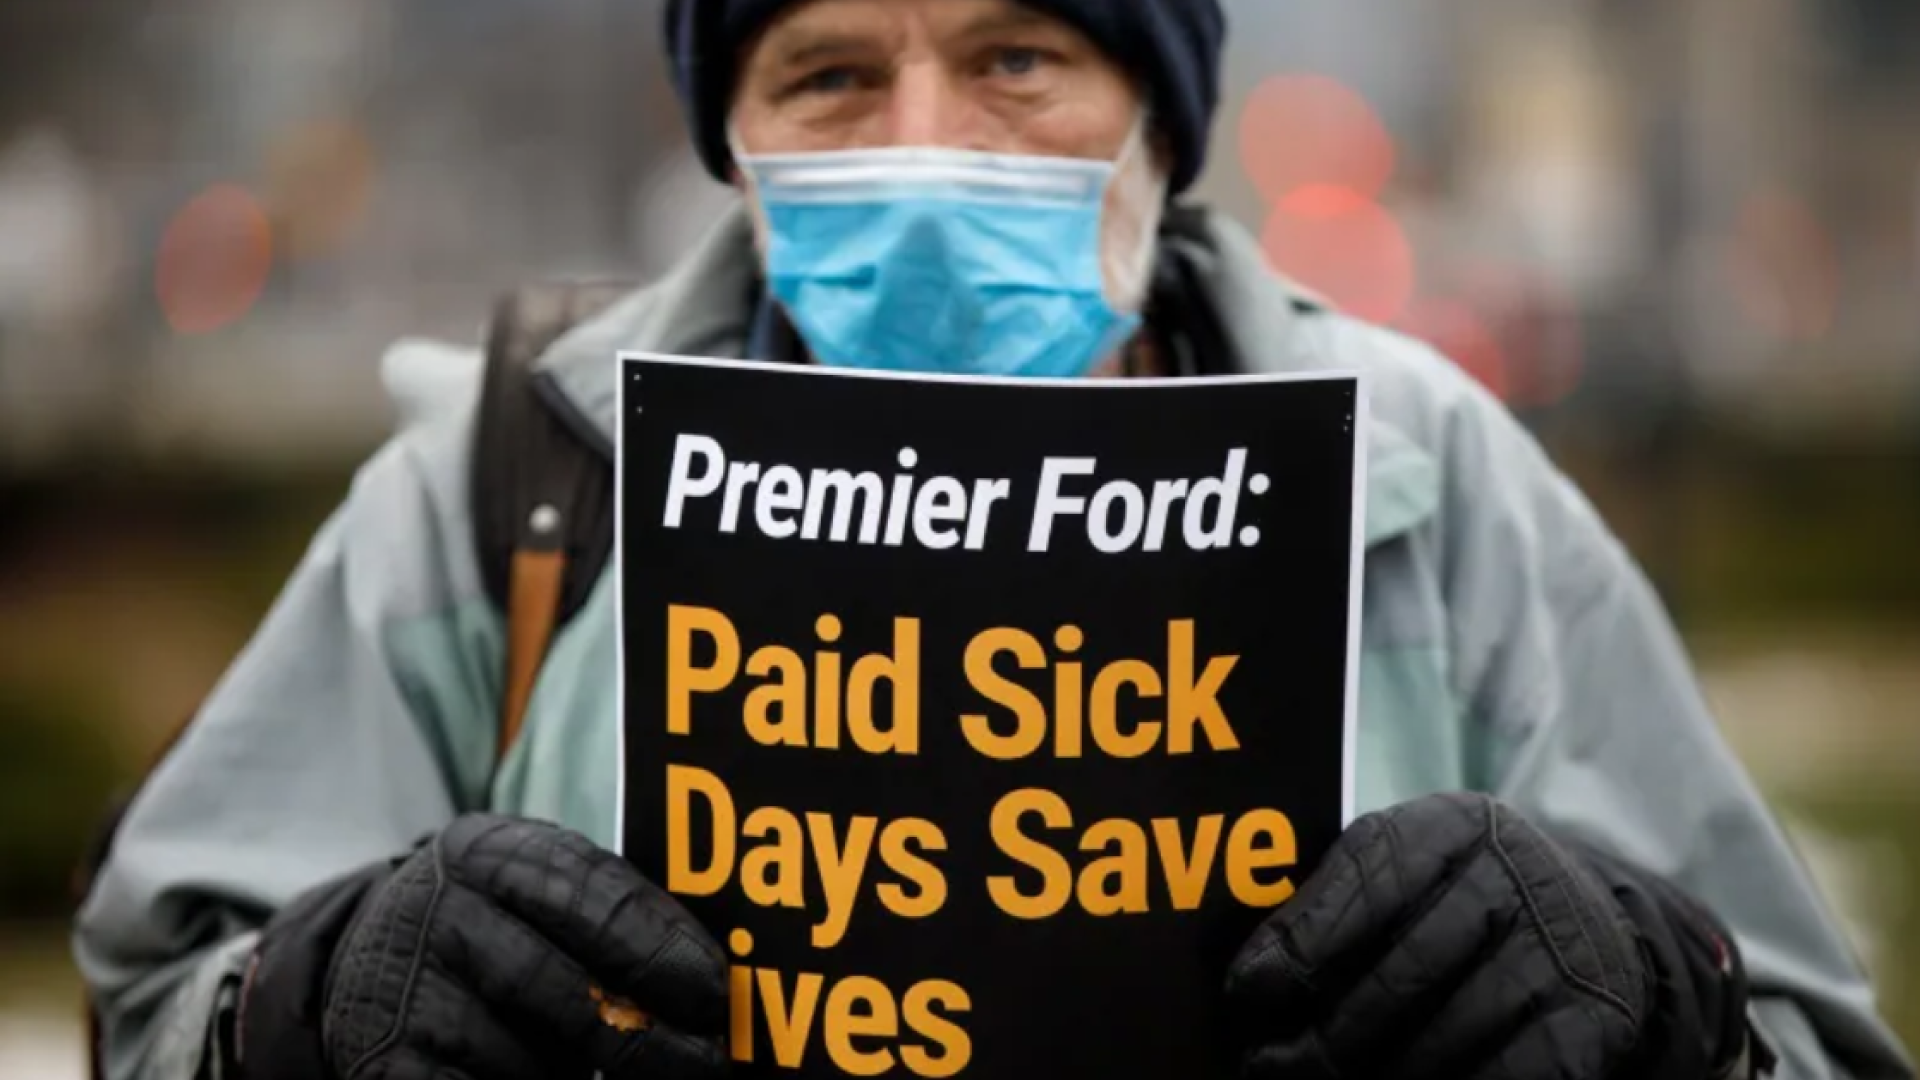 Image shows a person, outdoors, wearing a raincoat, gloves, a toque, and a face mask and holding a sign that reads 